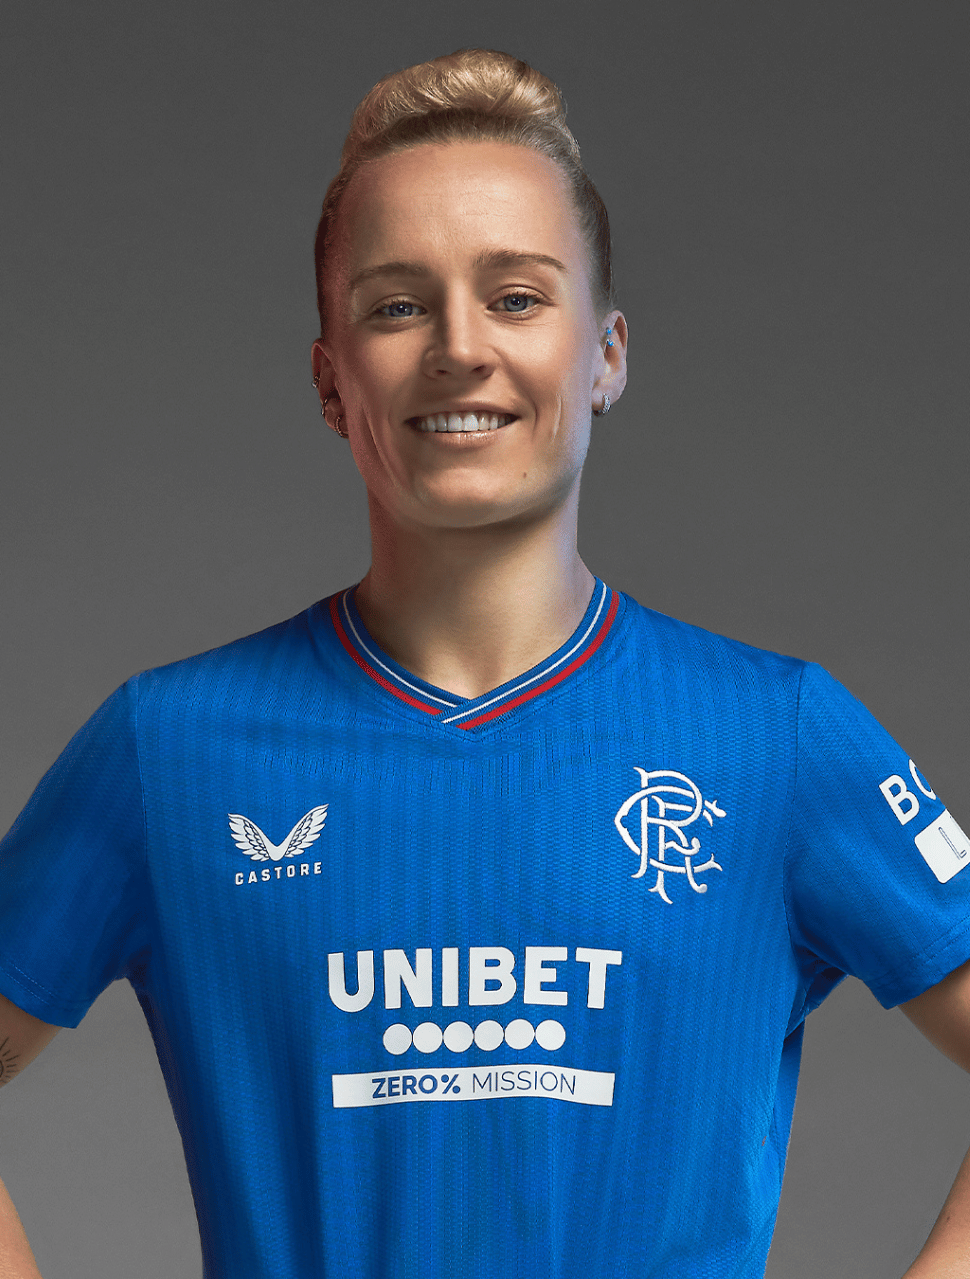 Rangers new kits 23/24 release date